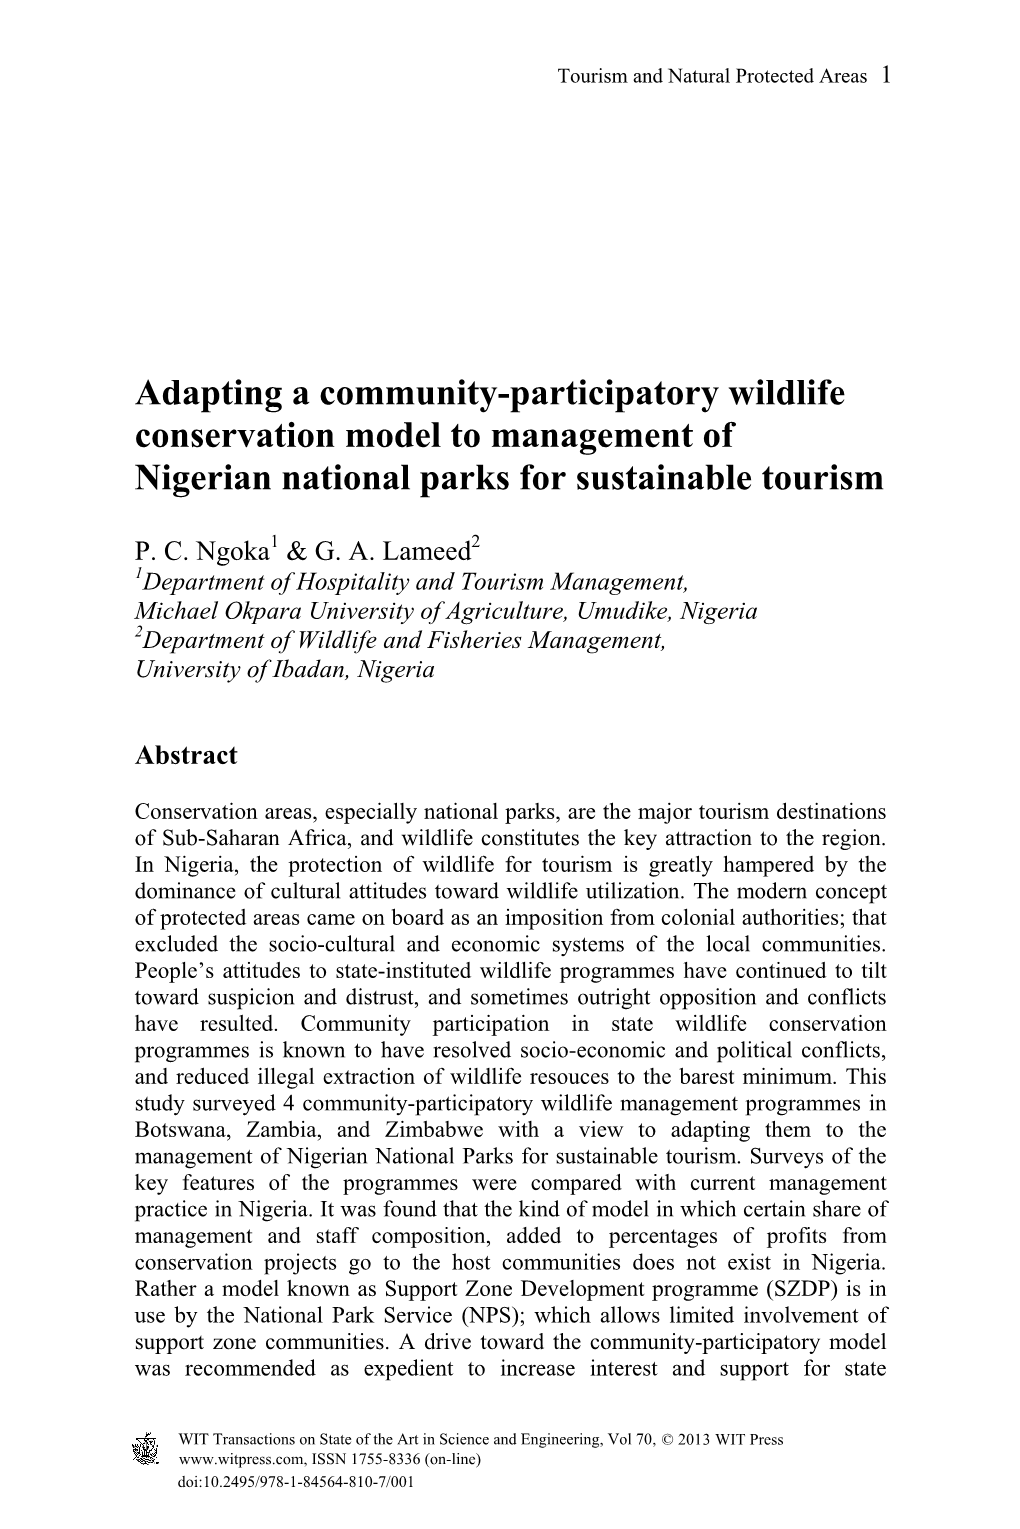 Adapting a Community-Participatory Wildlife Conservation Model to Management of Nigerian National Parks for Sustainable Tourism